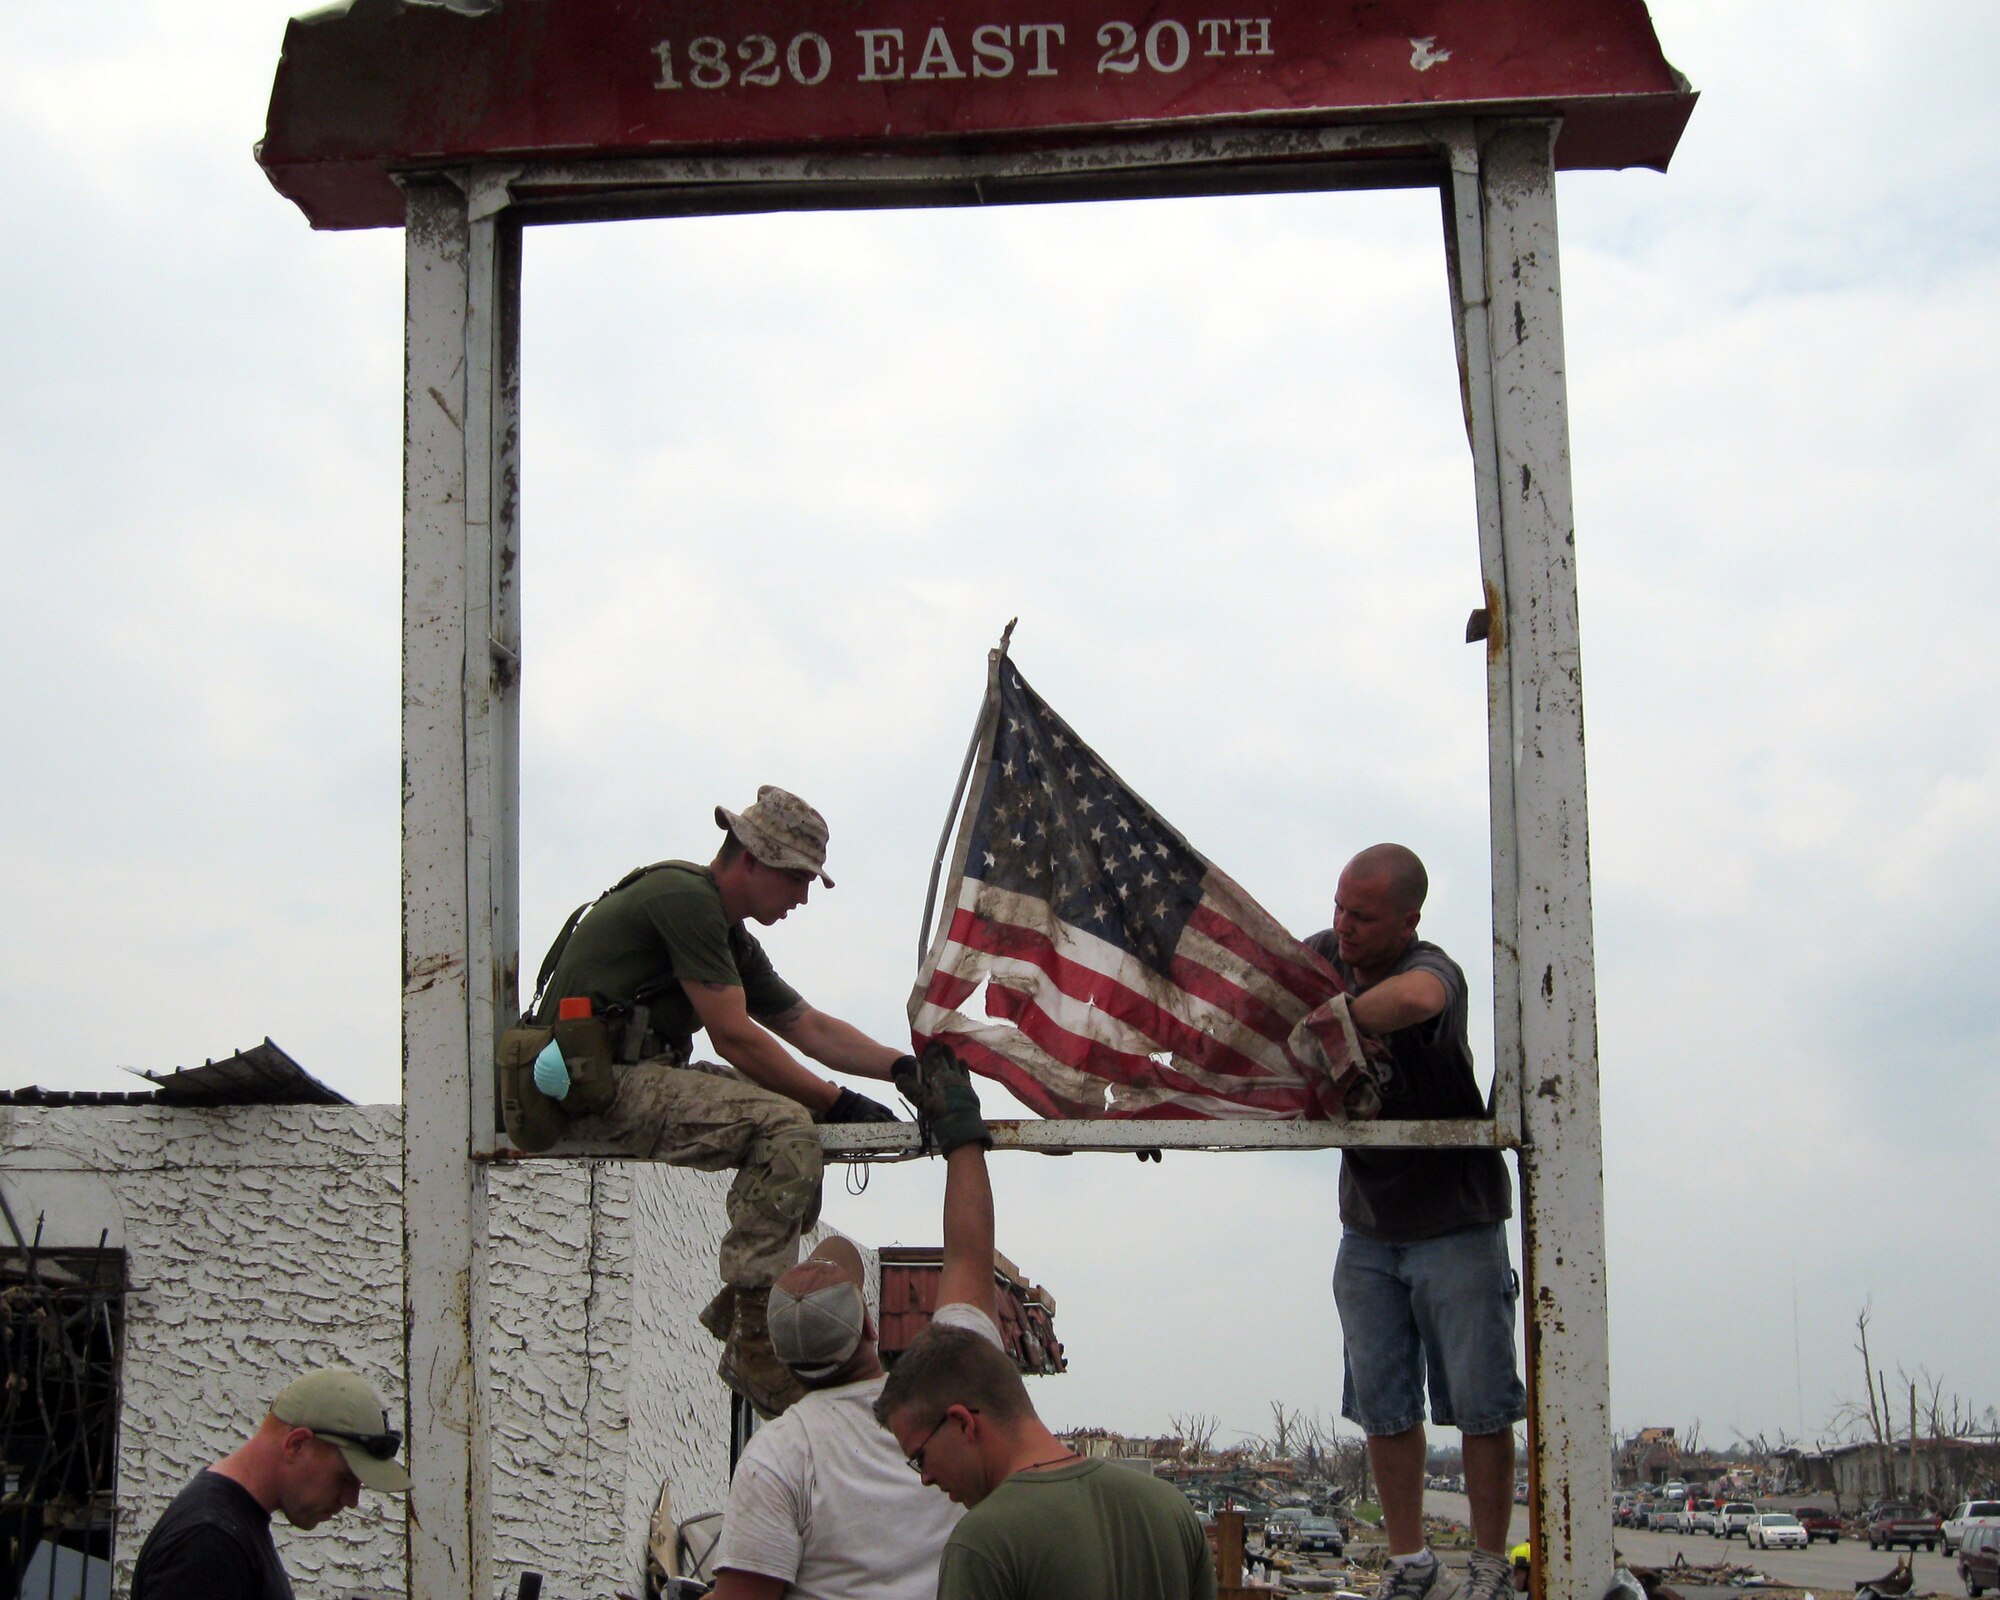 Volunteers fly a tattered American flag from a street sign in Joplin, Mo., May 28, 2011. Sixteen Airmen from Altus Air Force Base delivered donations to Joplin, as well as helped search for survivors May 27-28. (Courtesy photo)                         